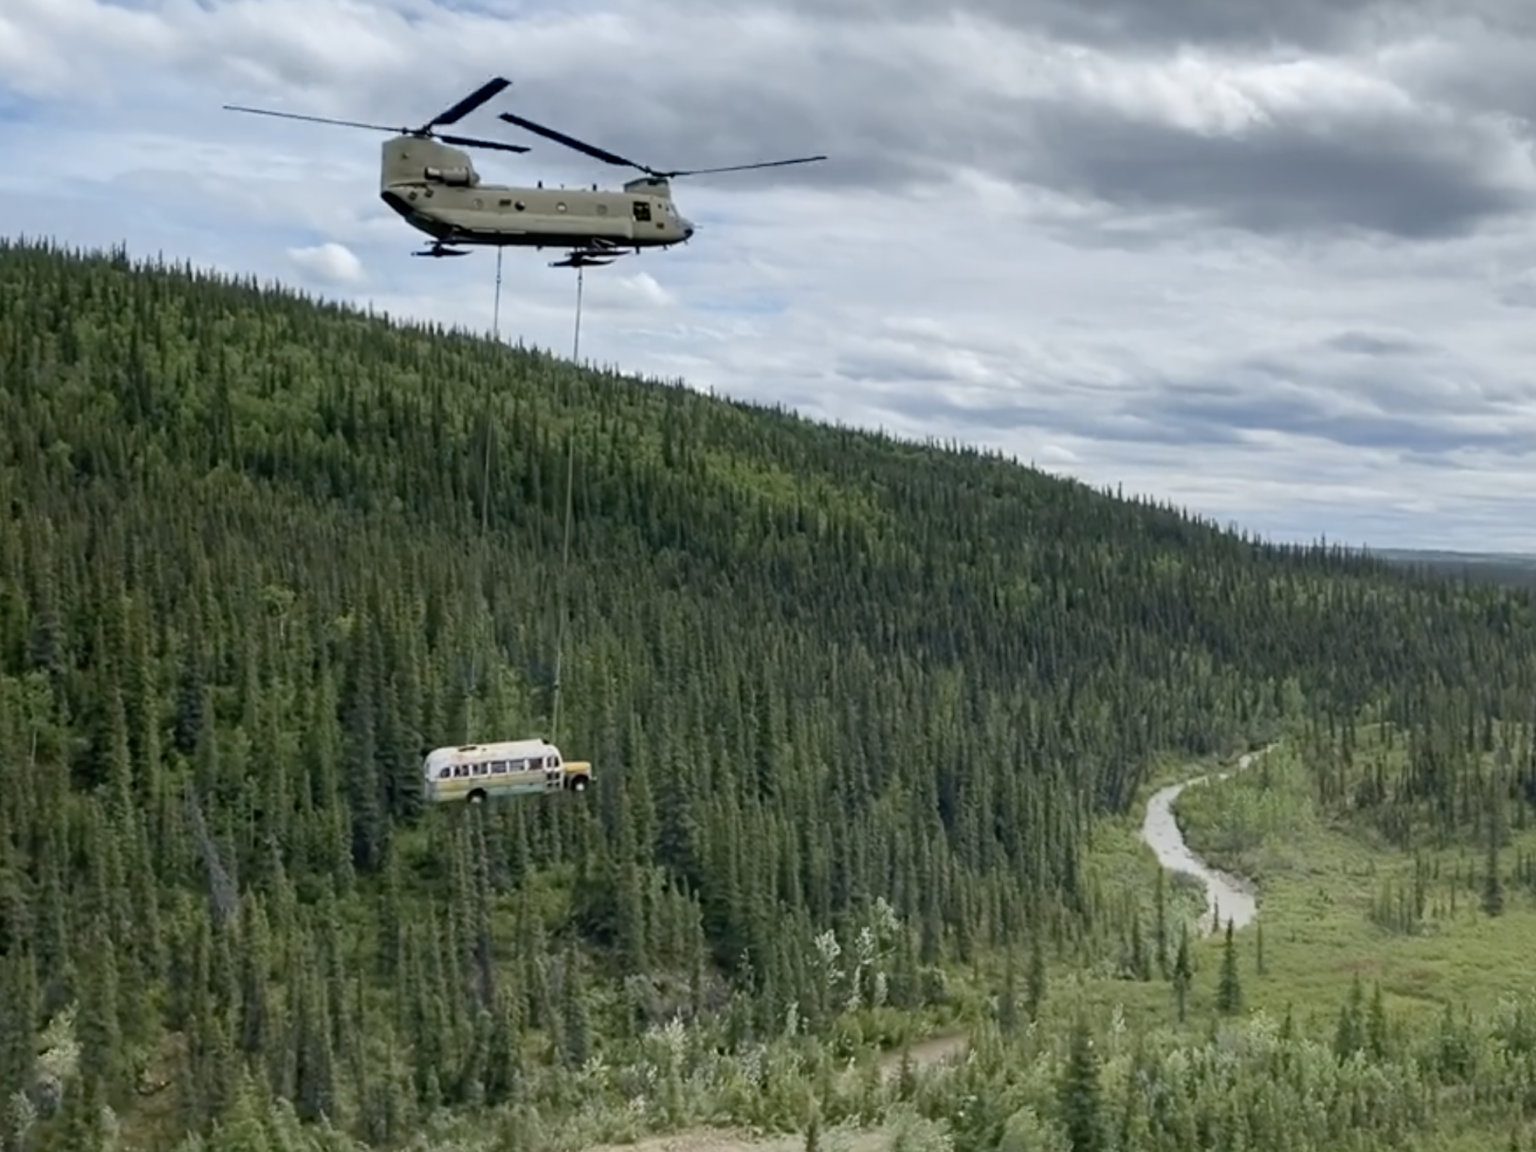 The Alaska Army National Guard removed "Bus 142" from the wilderness this week.